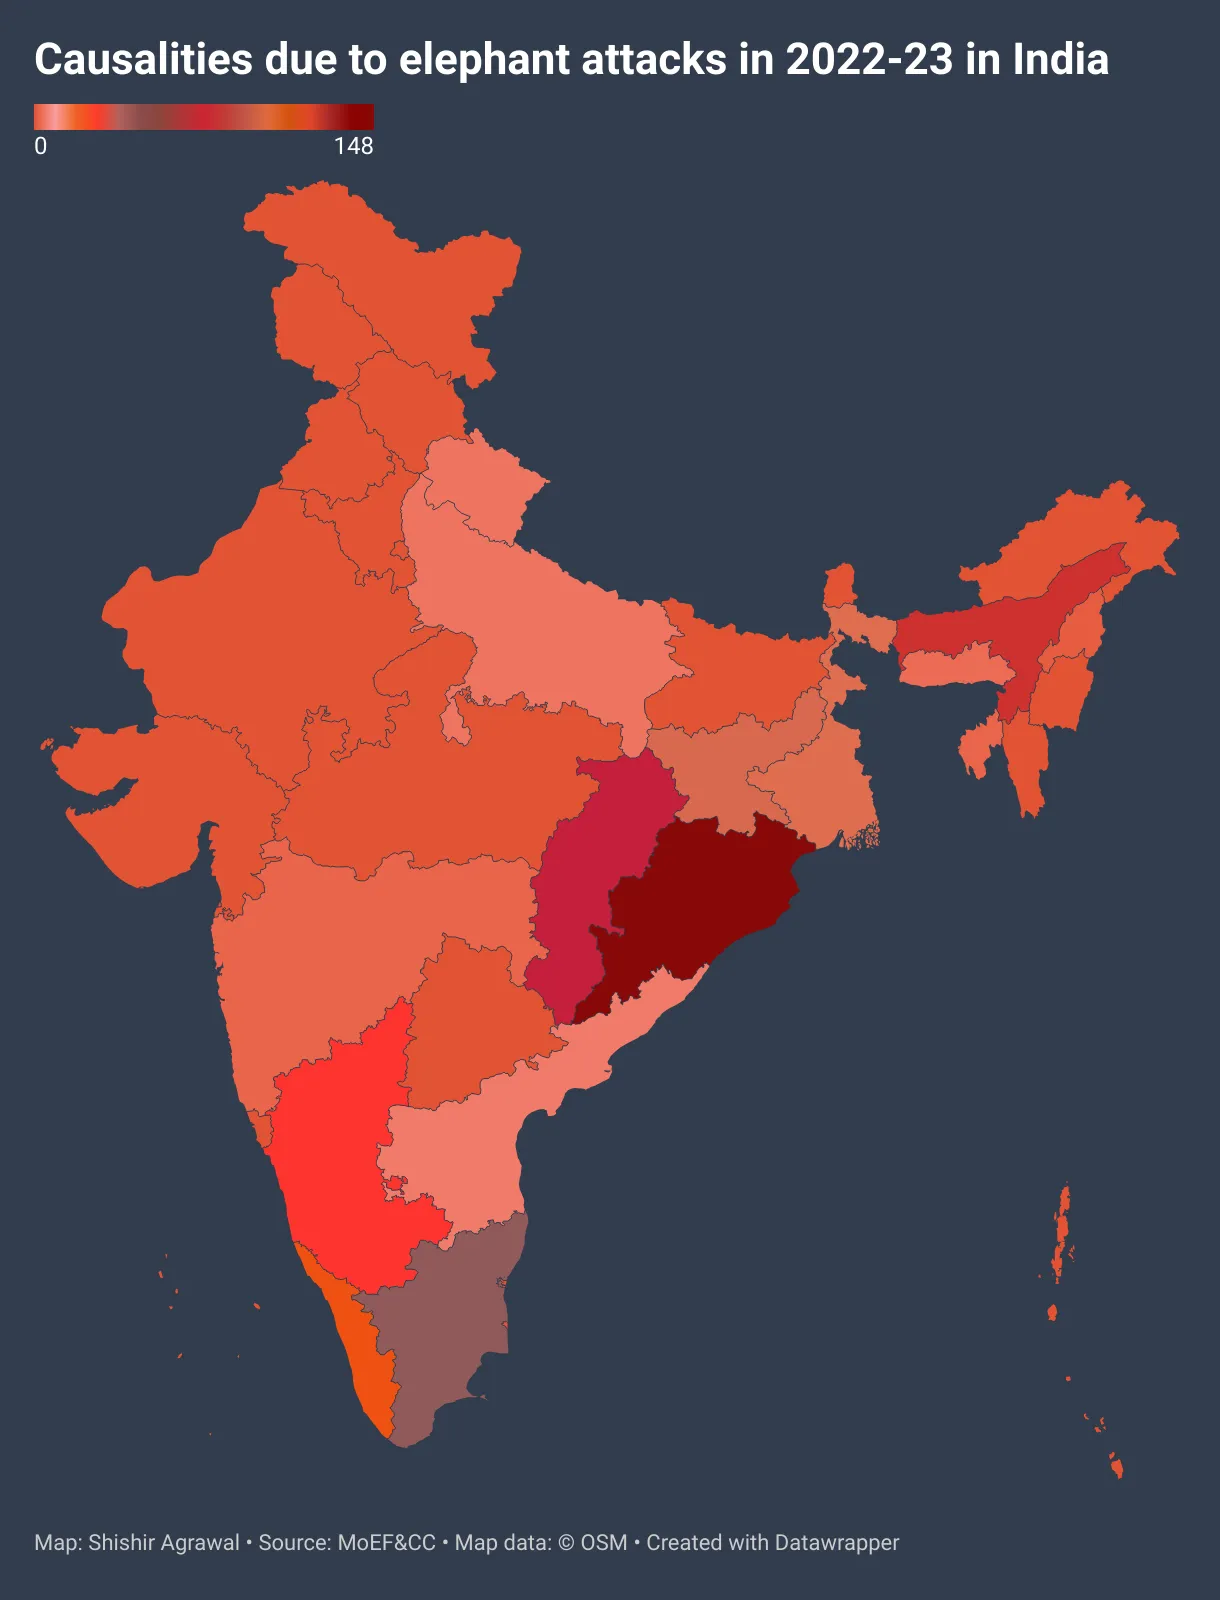 calsualties due to elephant attacks in India in 2023, chart